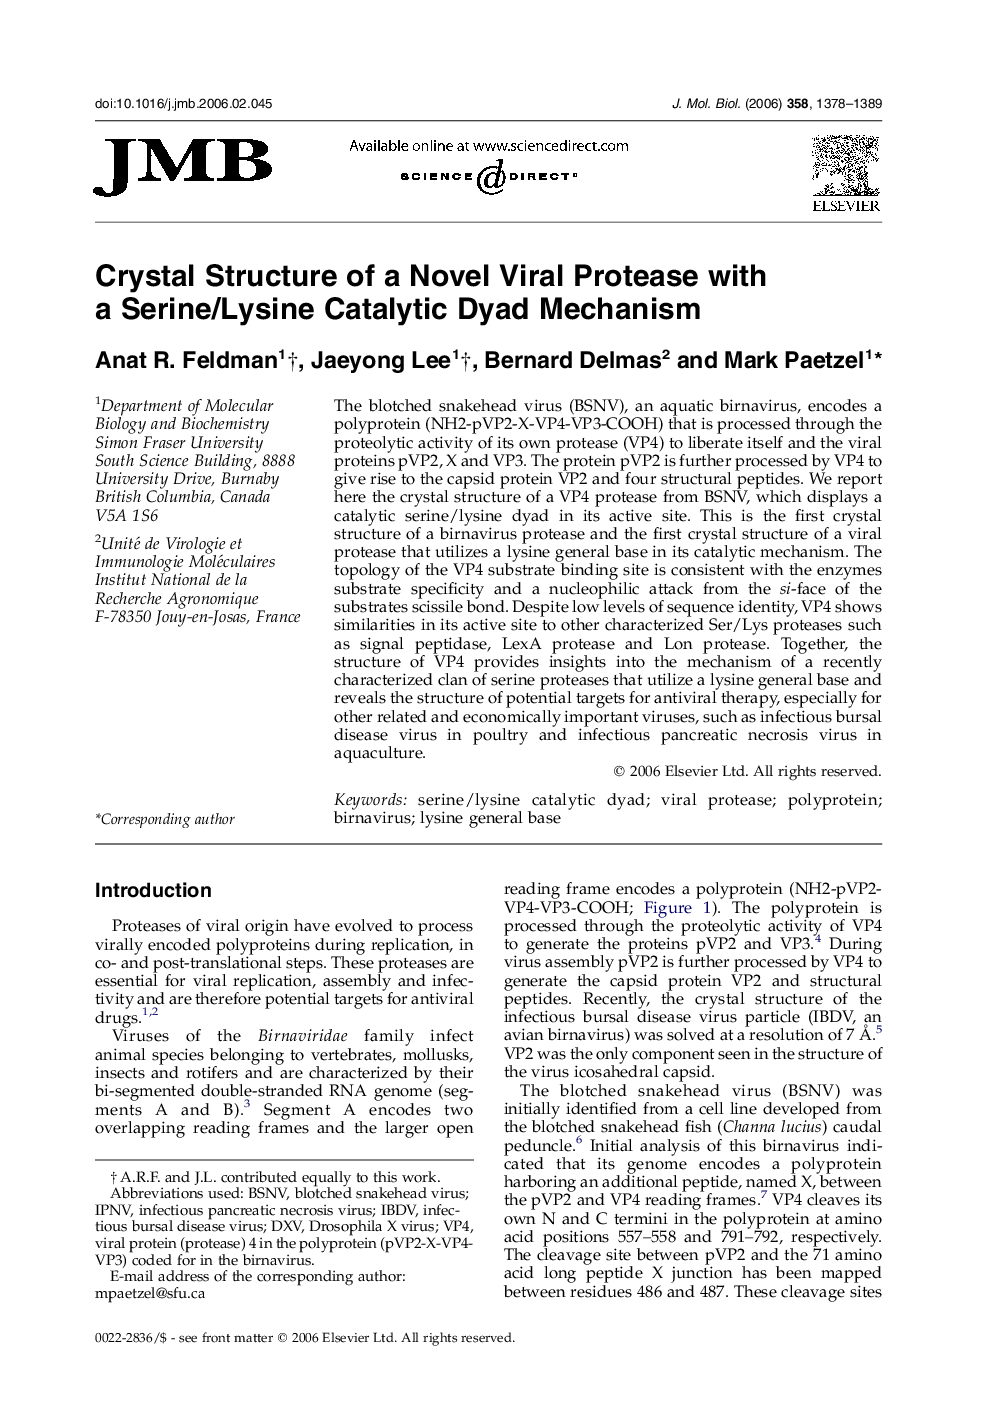 Crystal Structure of a Novel Viral Protease with a Serine/Lysine Catalytic Dyad Mechanism